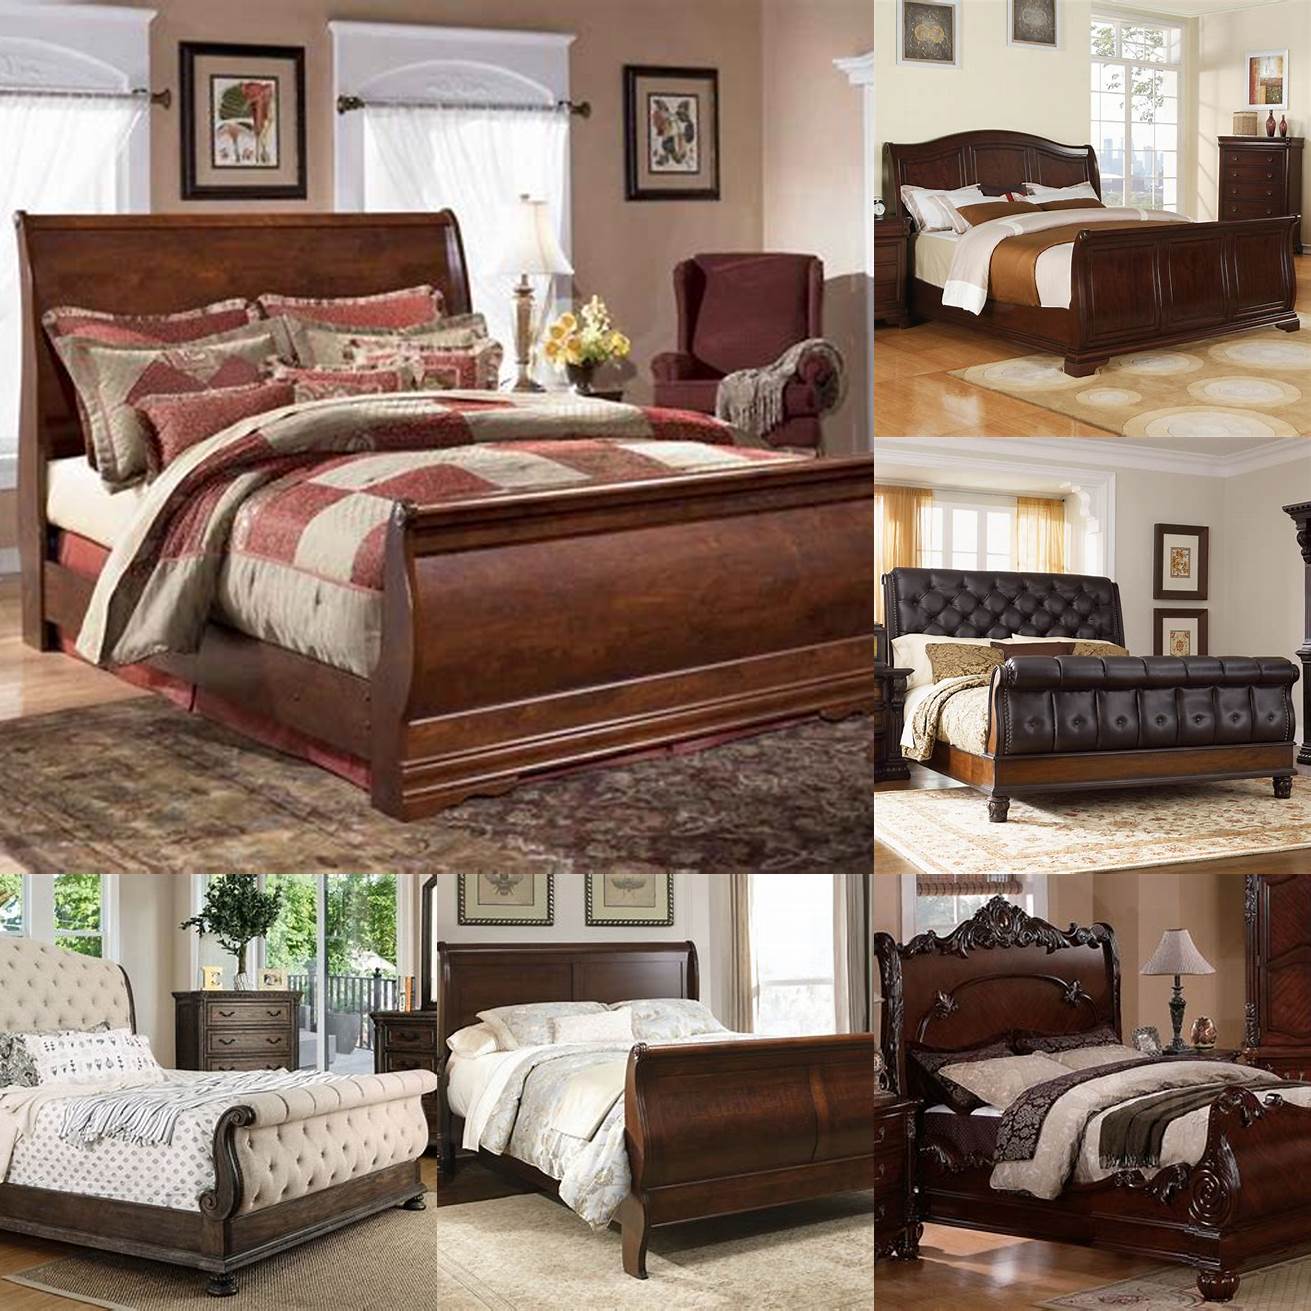 Image 3 A Sleigh Bed Queen with decorative pillows